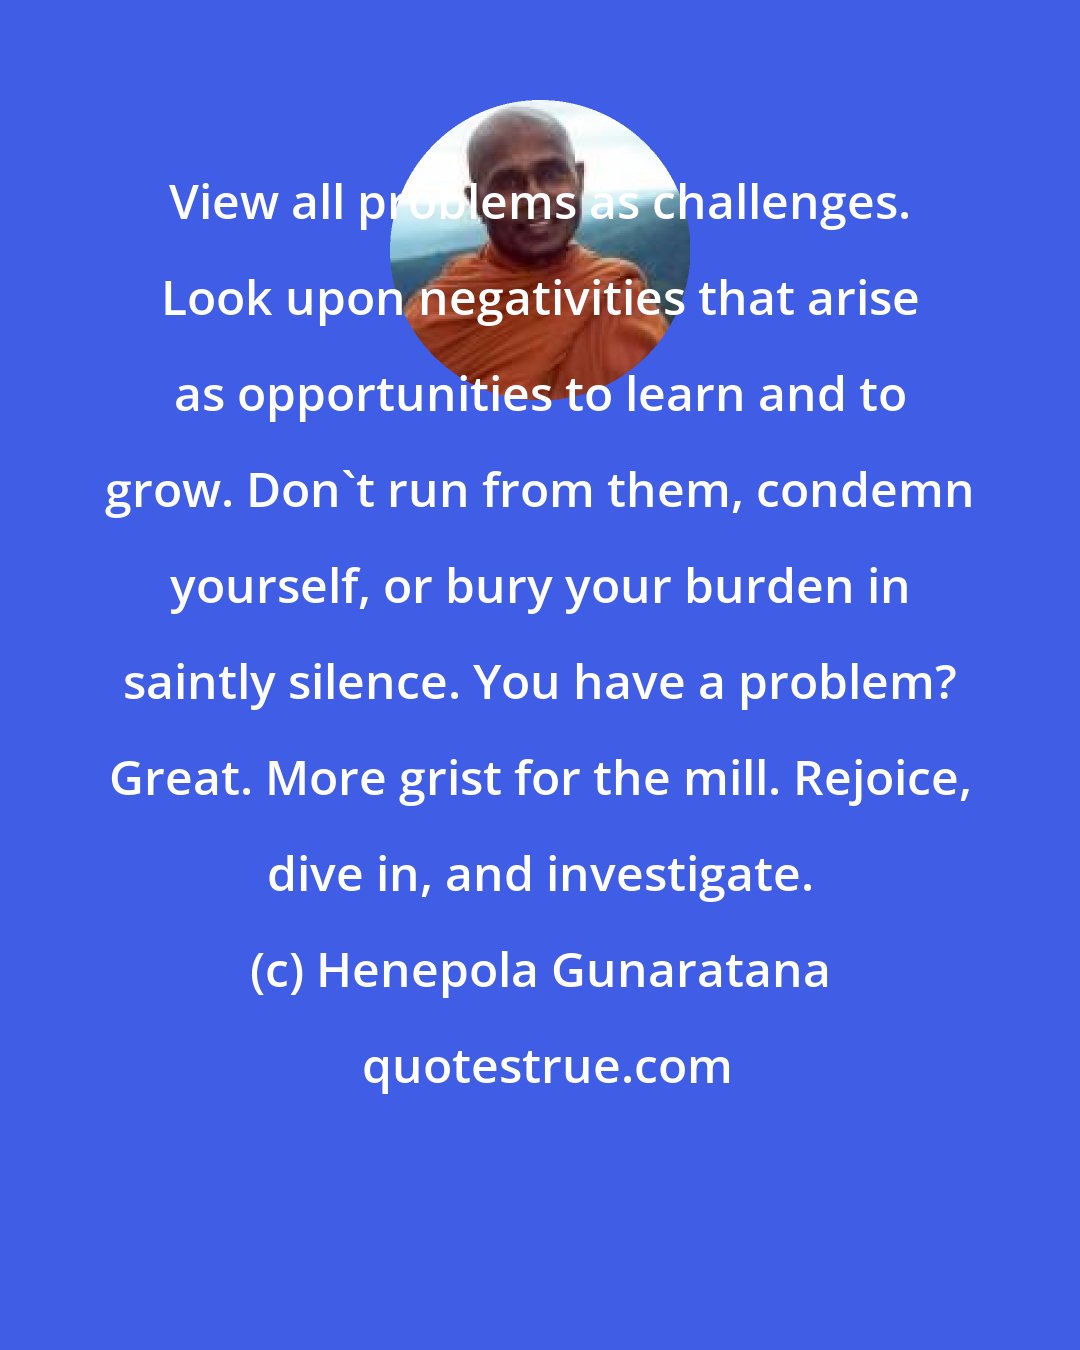 Henepola Gunaratana: View all problems as challenges. Look upon negativities that arise as opportunities to learn and to grow. Don't run from them, condemn yourself, or bury your burden in saintly silence. You have a problem? Great. More grist for the mill. Rejoice, dive in, and investigate.